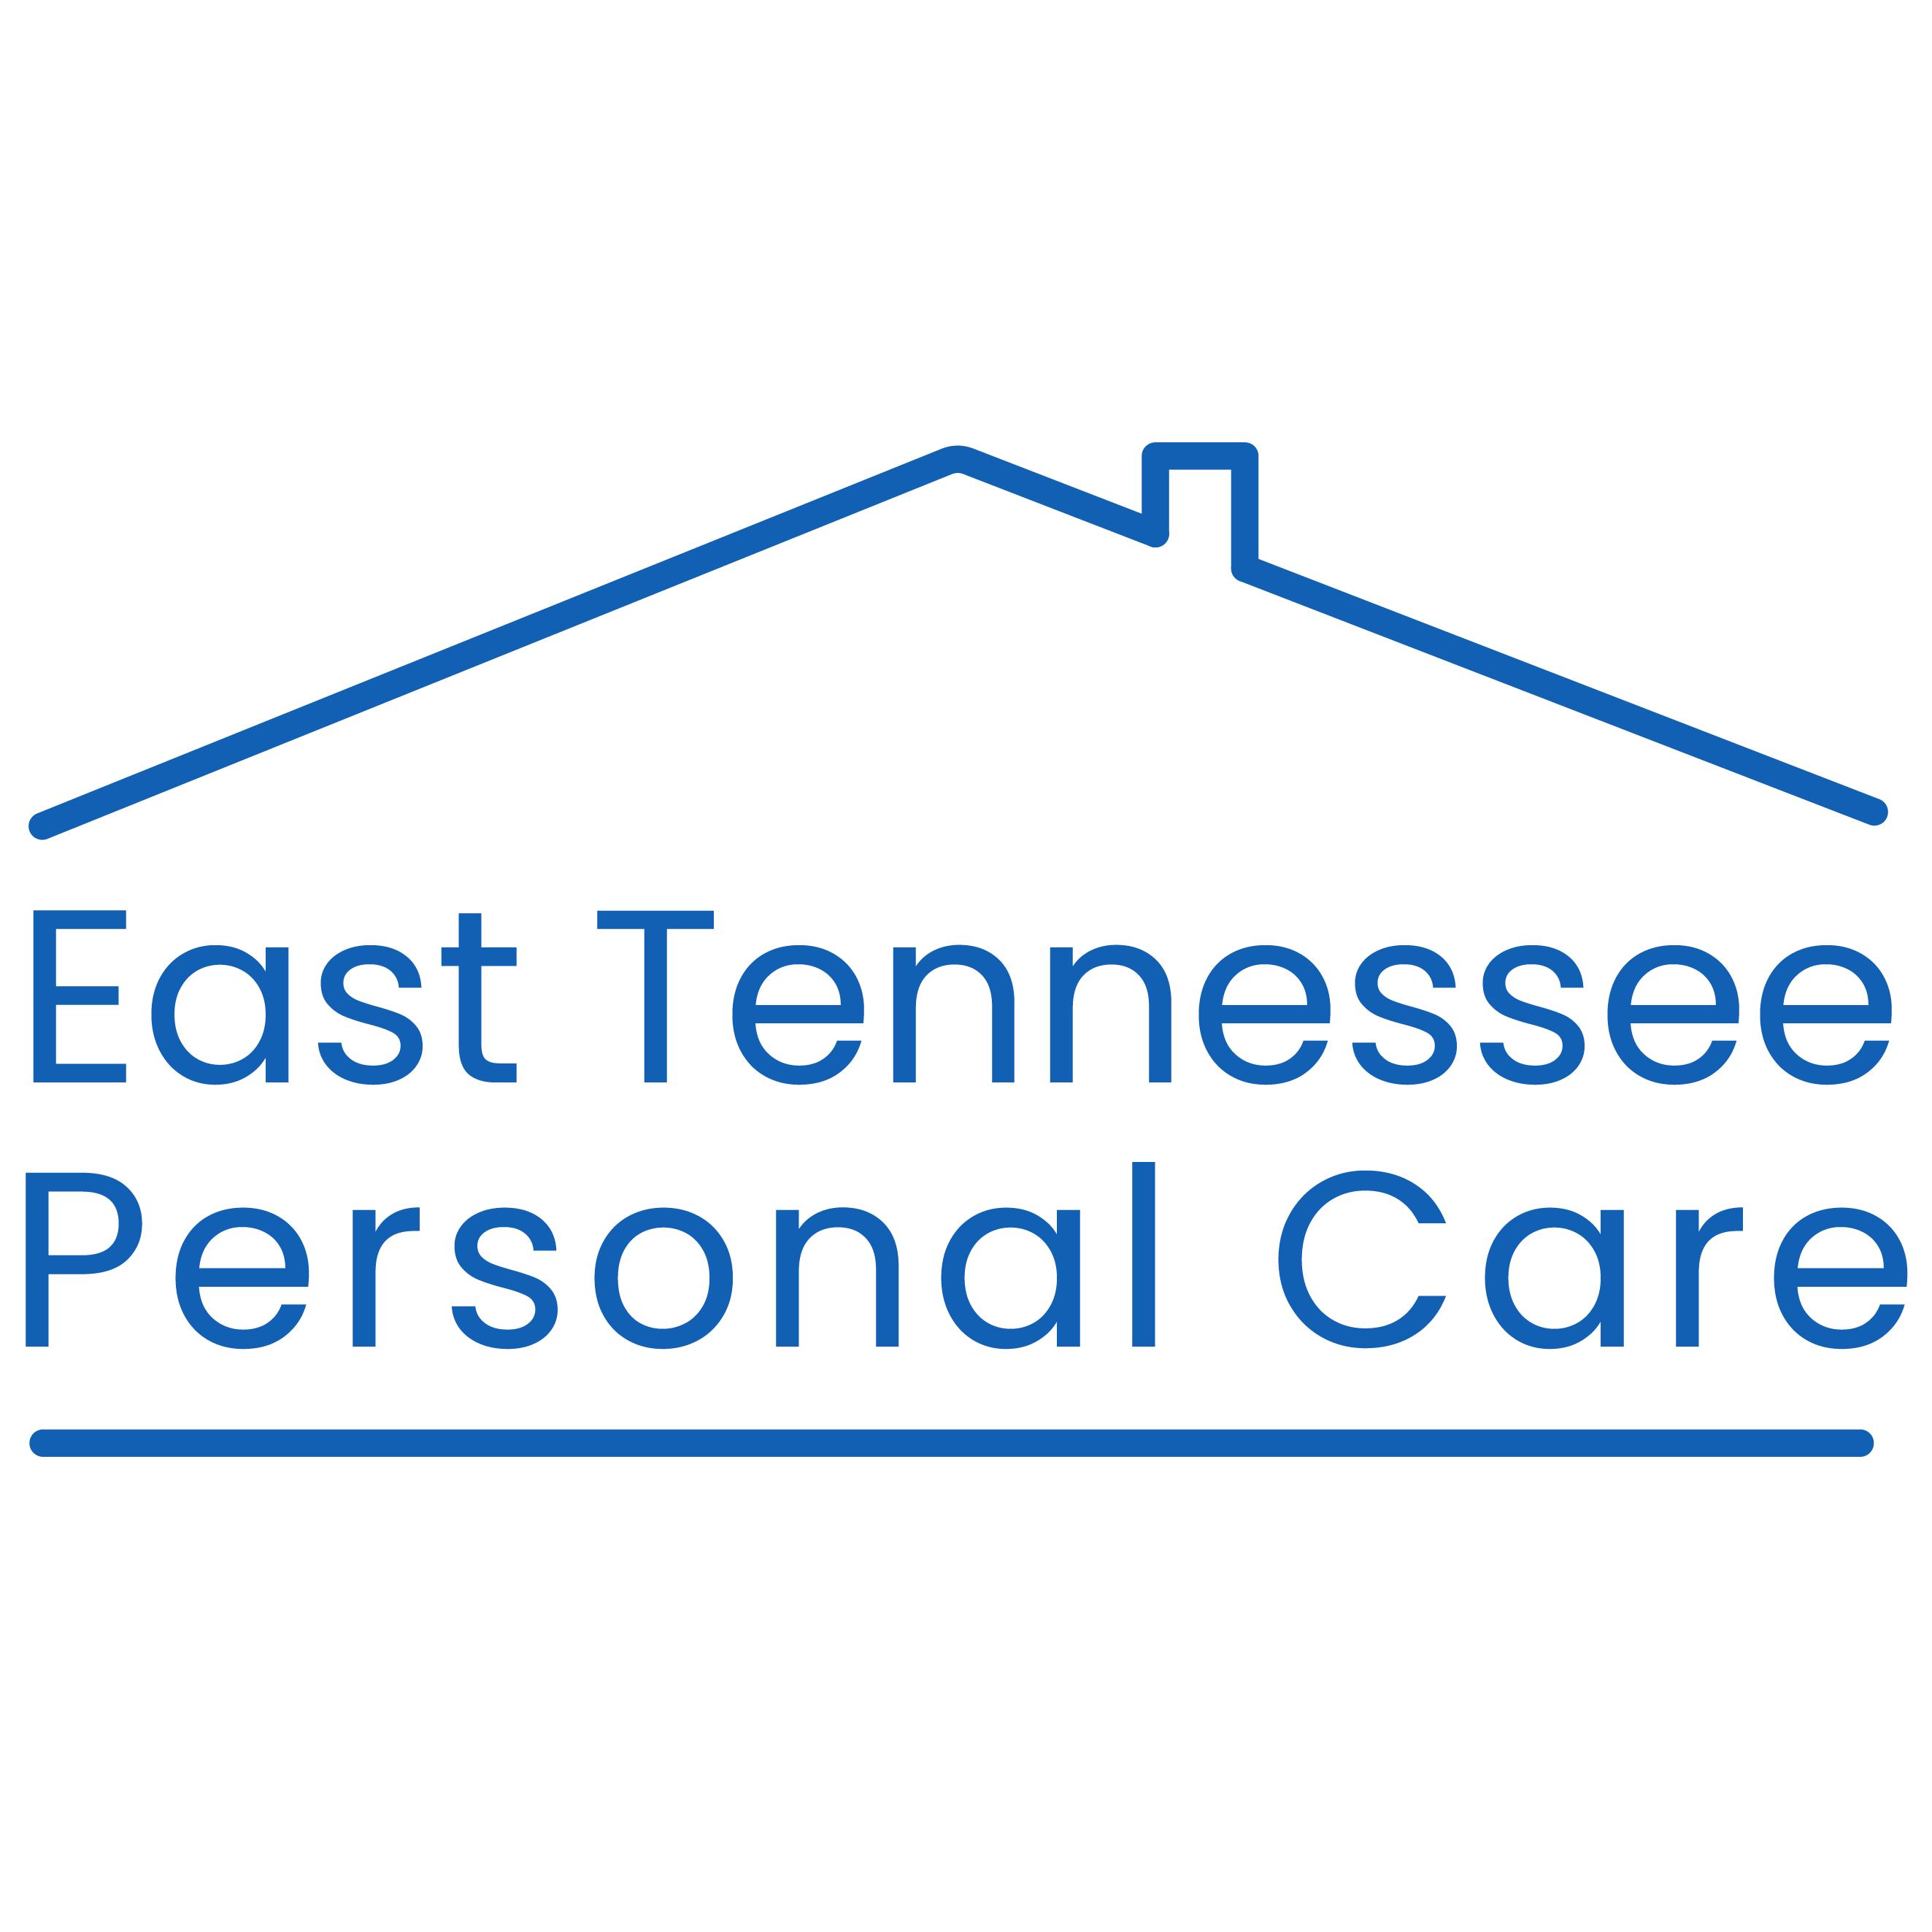 East Tennessee Personal Care